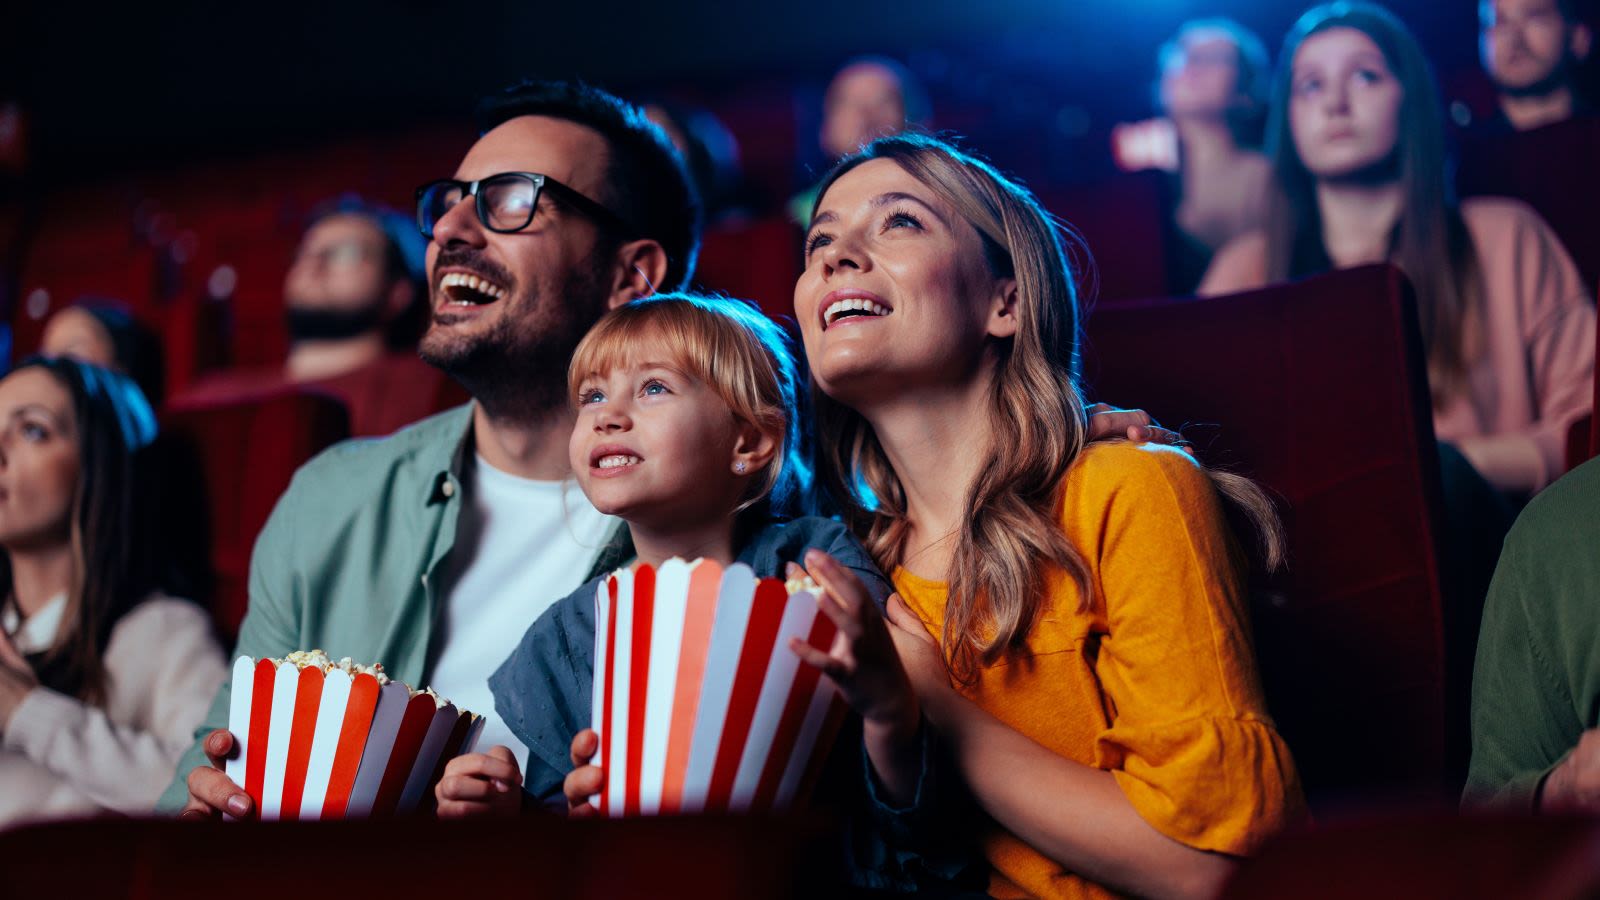 Free Movie Weekends kick off across the US in select cities, here's who's participating